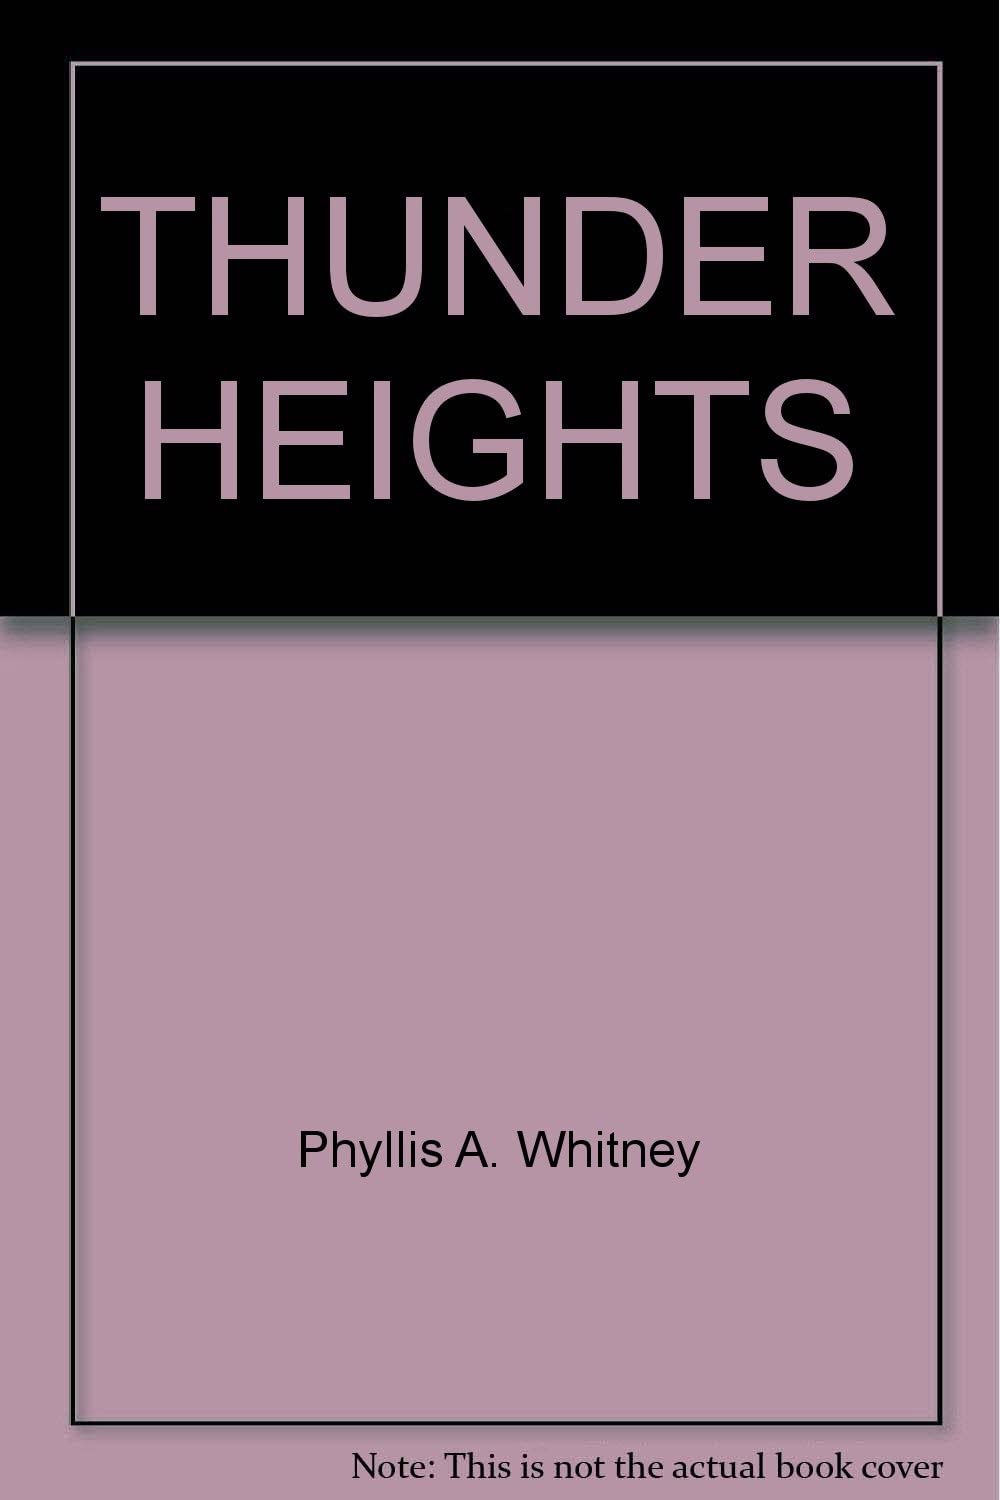 Thunder Heights